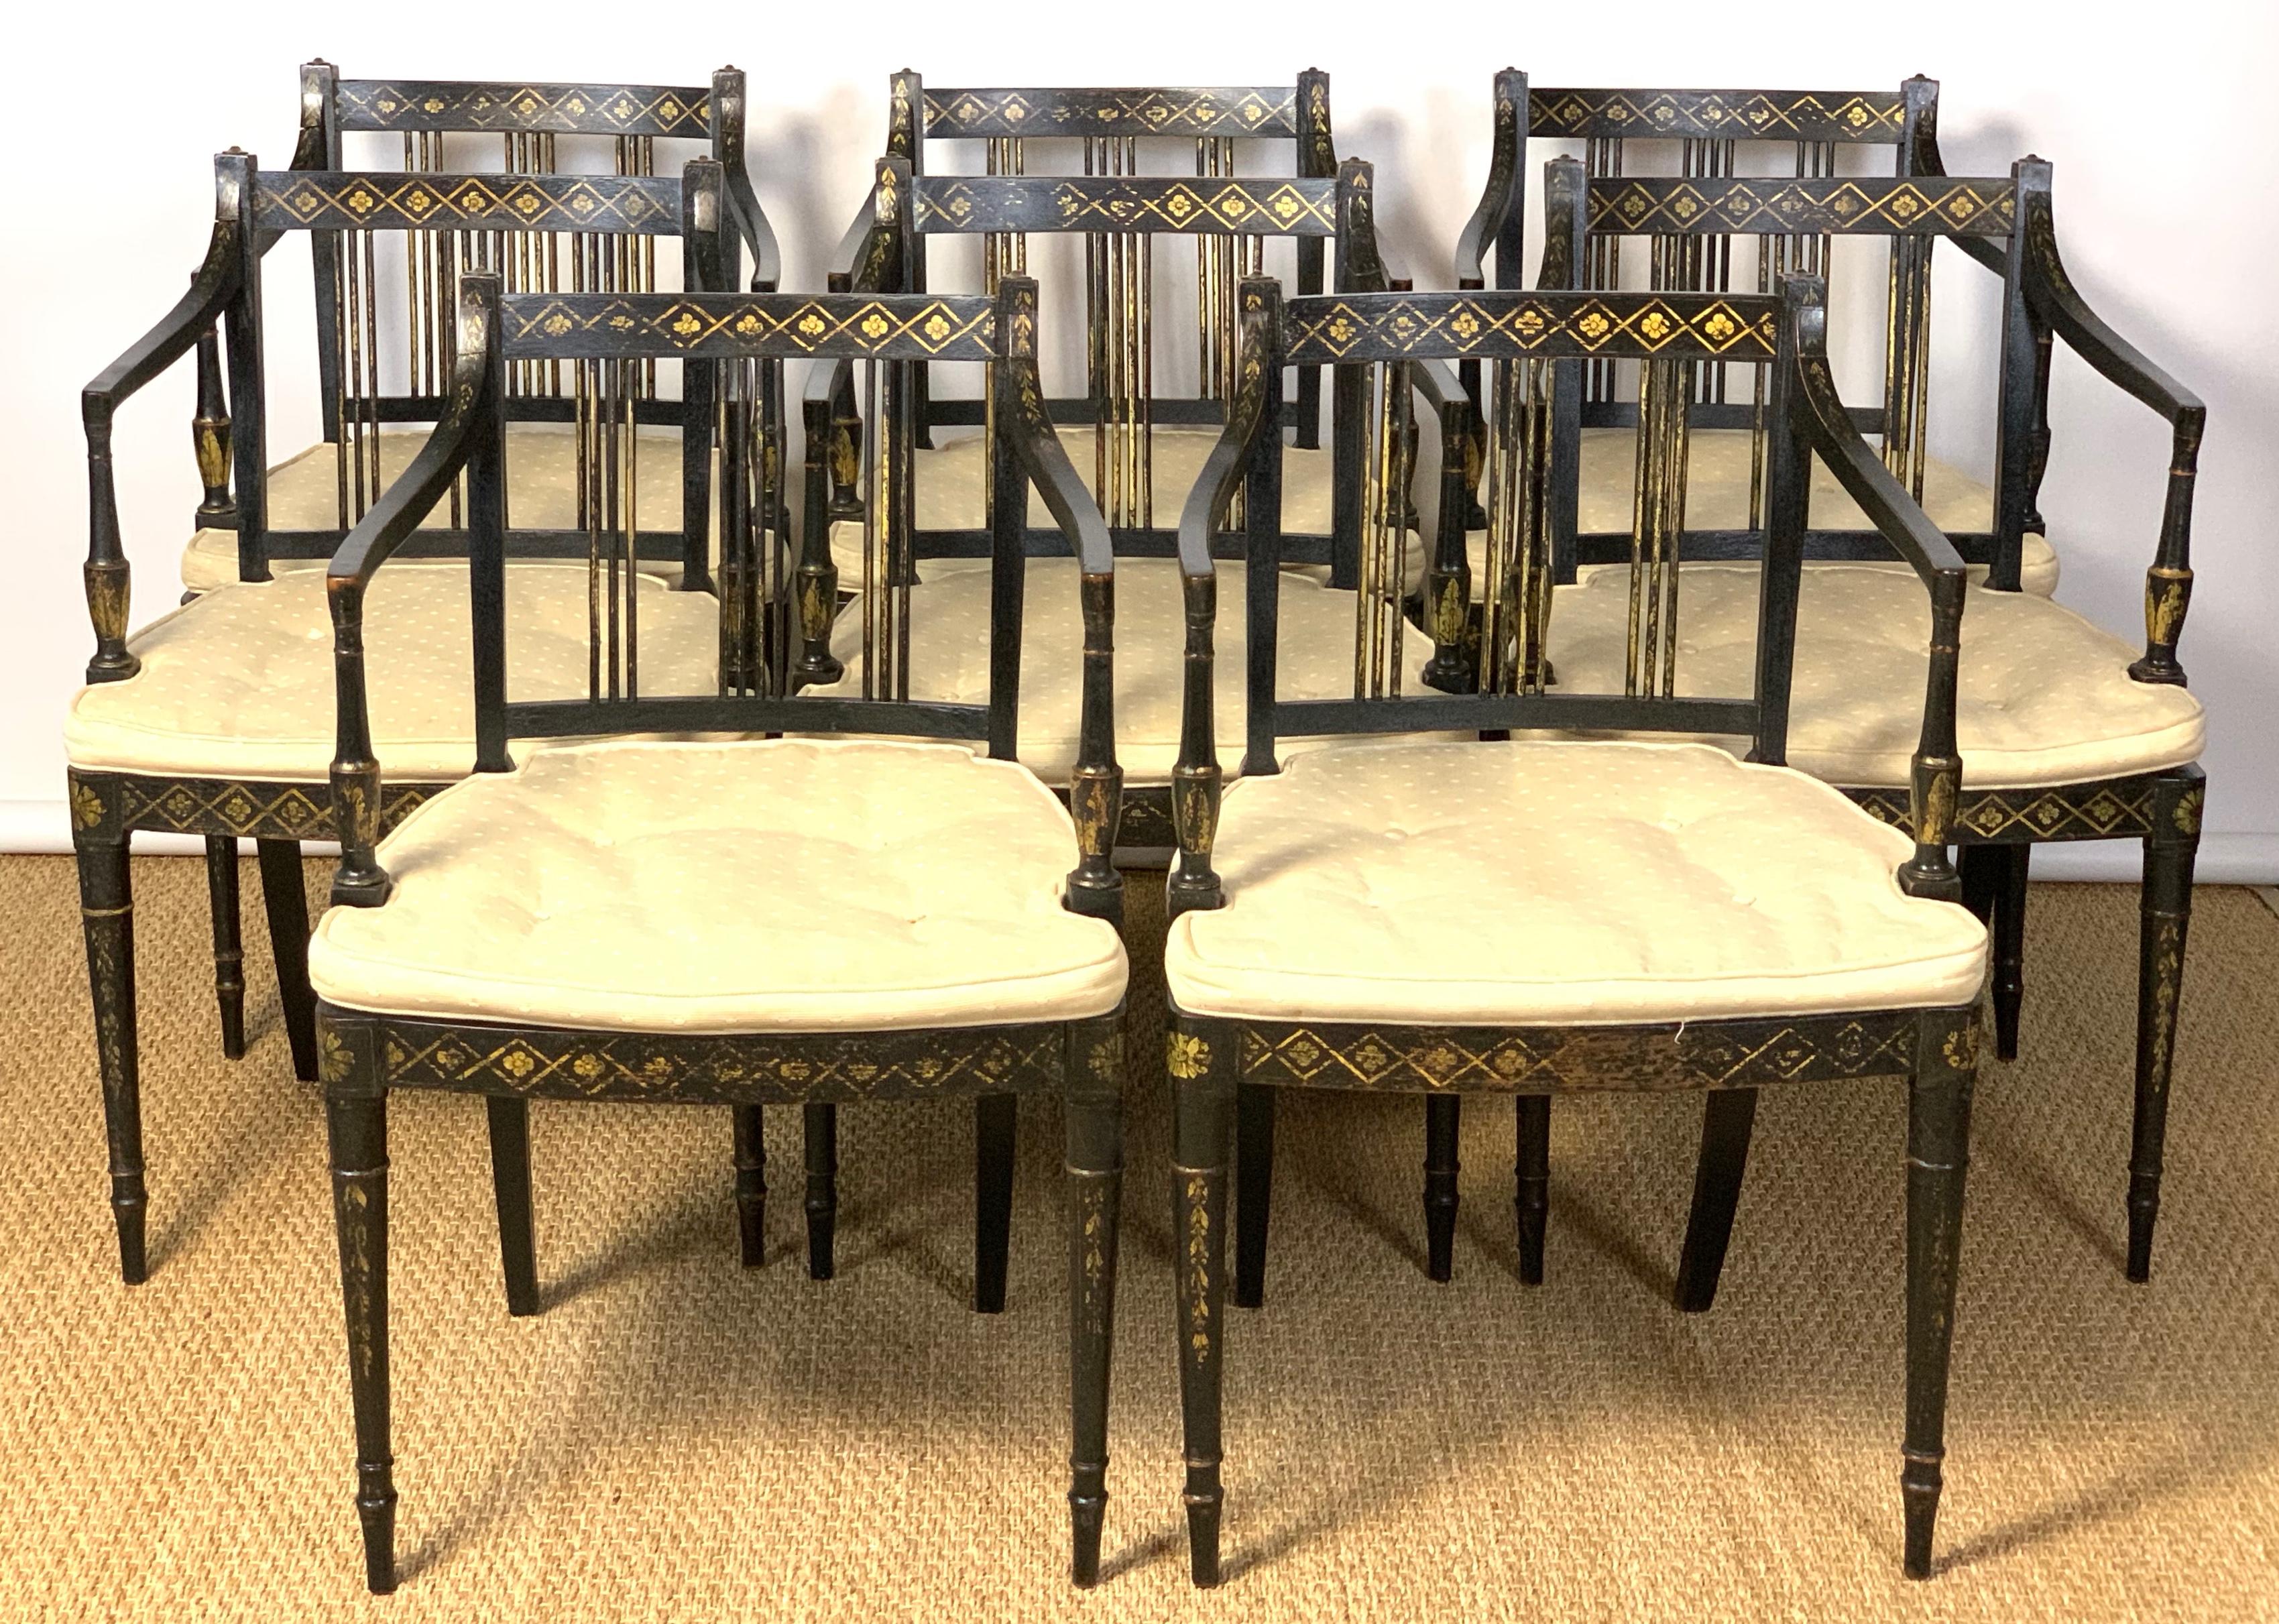 An exceptionally elegant and rare set of twelve early 19th Century. English Regency ebonized dining chairs comprising all arms. Each chair displays gilded decorations throughout with caned seats and custom fitted seat cushions.